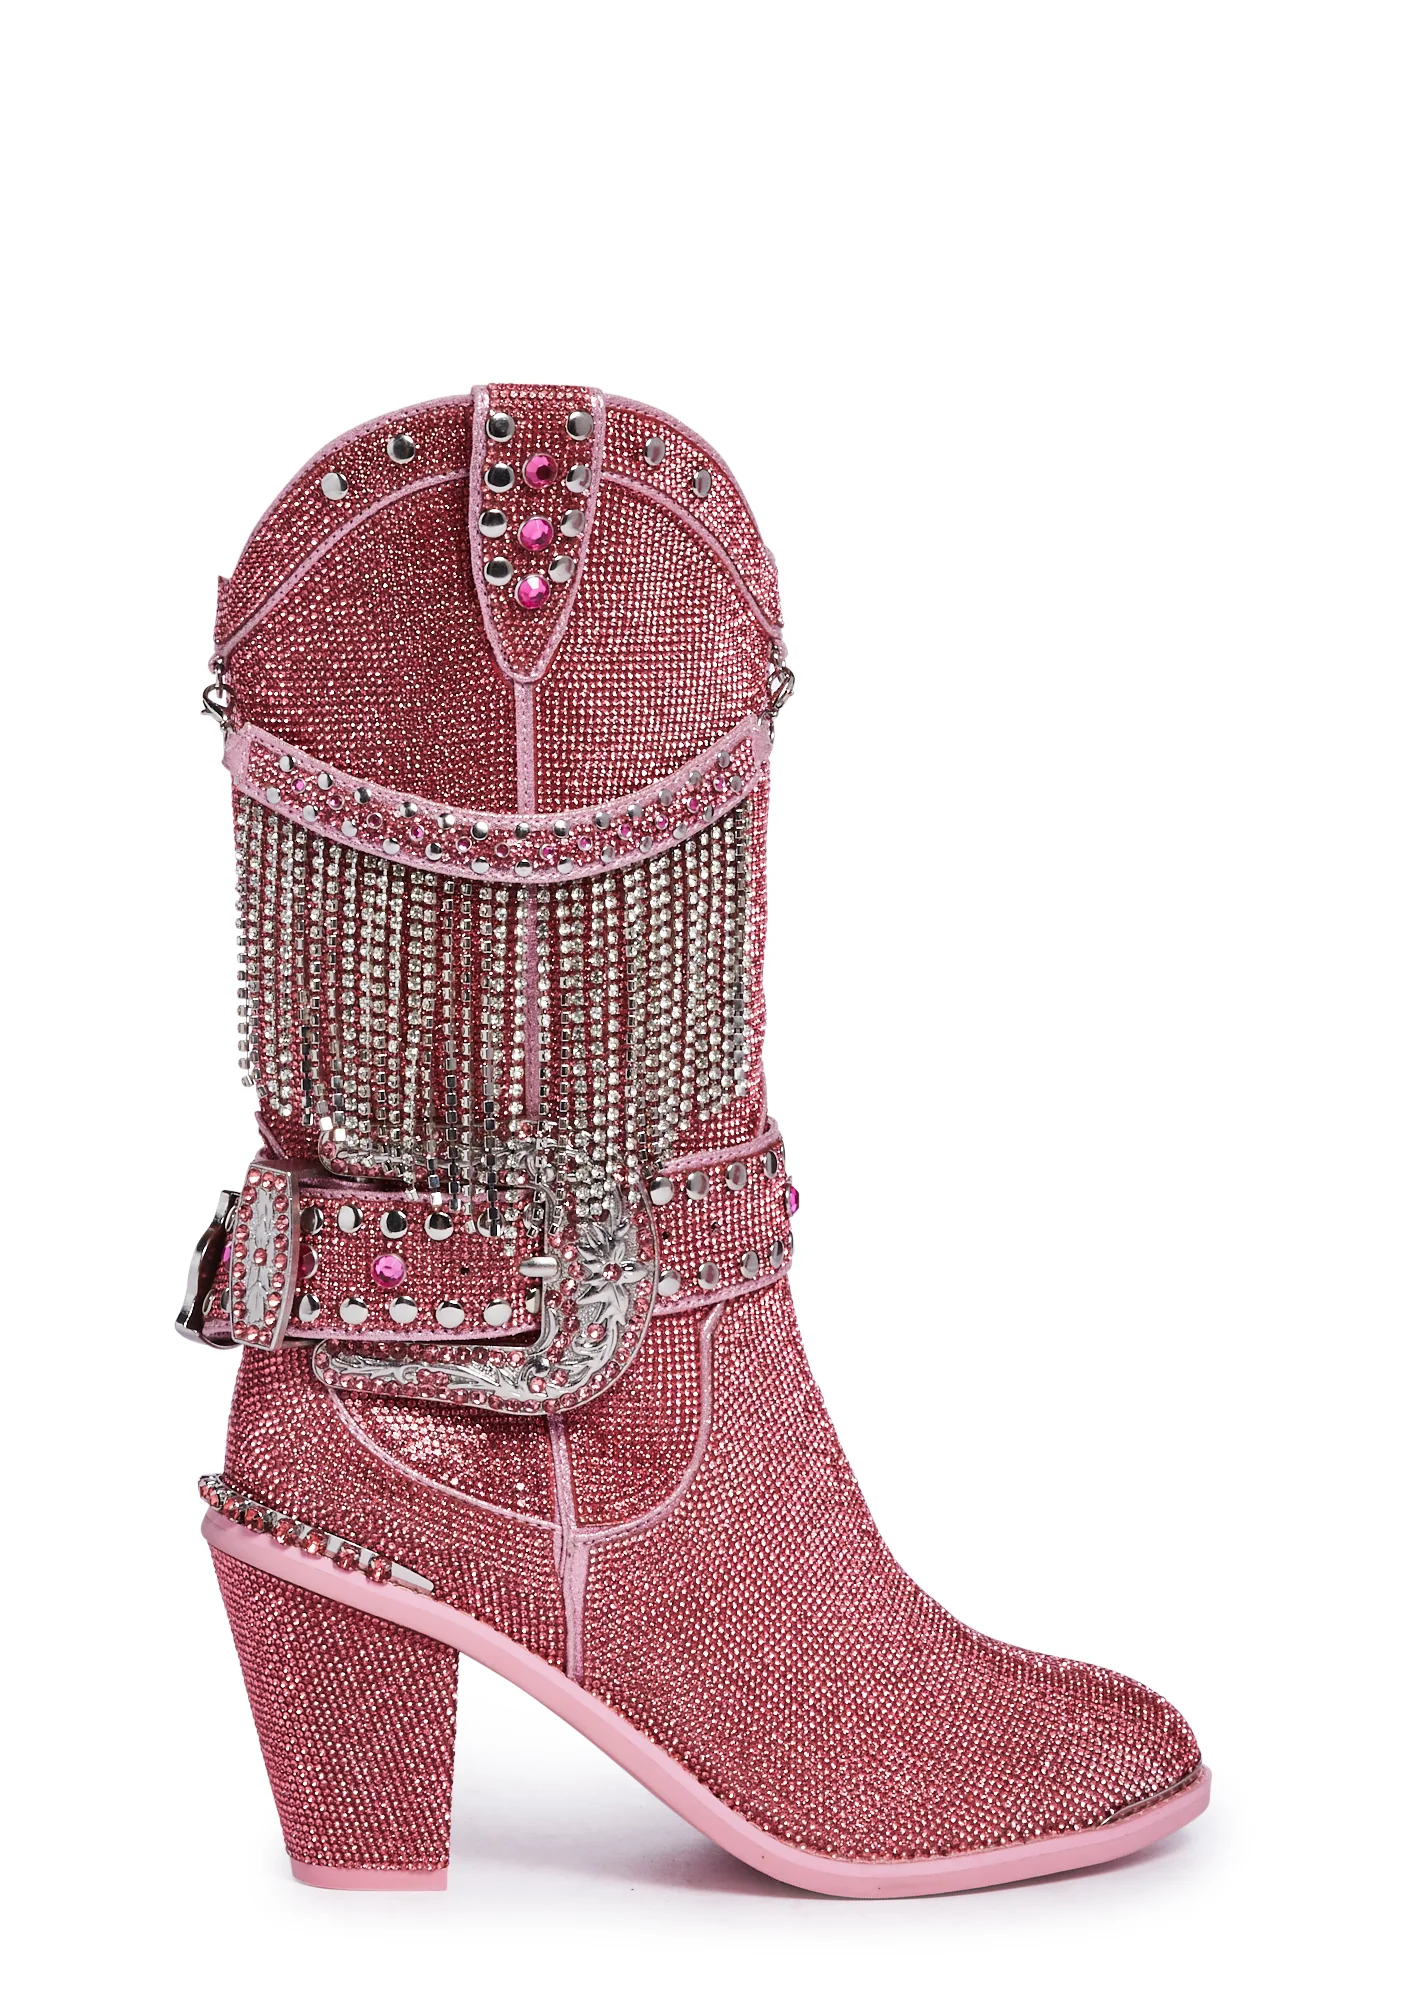 Taylor swift boots2014